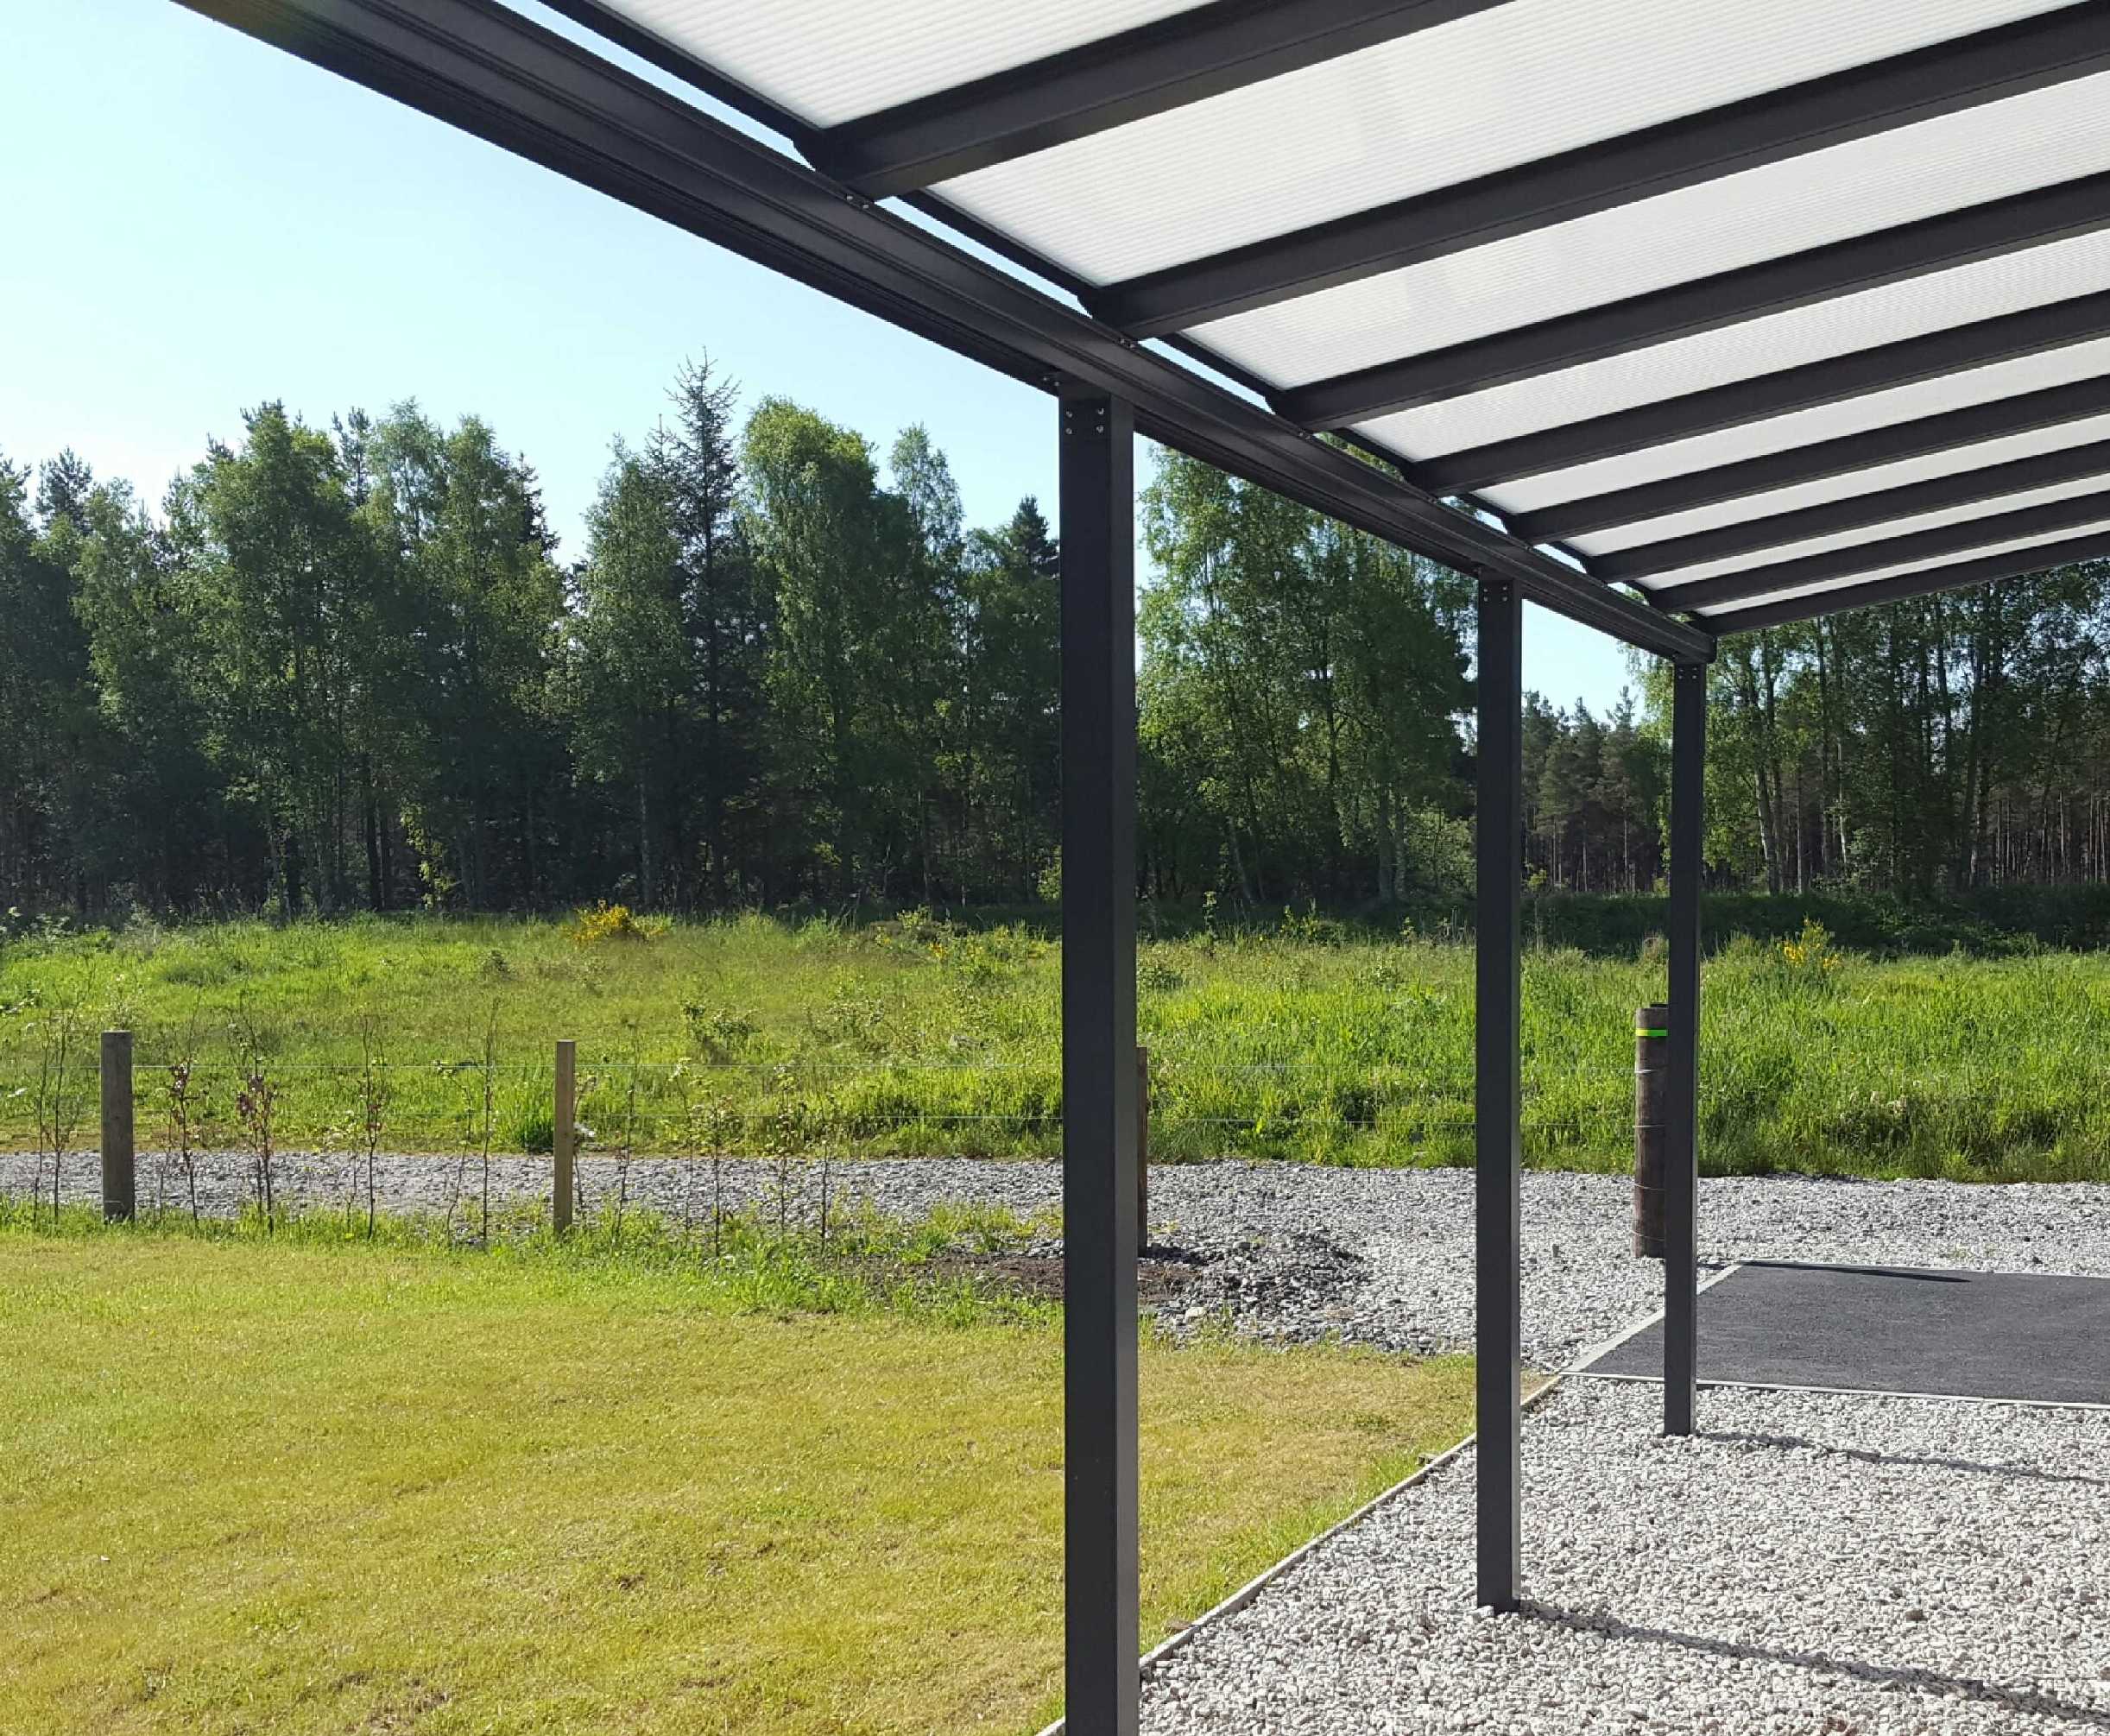 Omega Smart Lean-To Canopy, Anthracite Grey, 16mm Polycarbonate Glazing - 4.9m (W) x 3.5m (P), (3) Supporting Posts